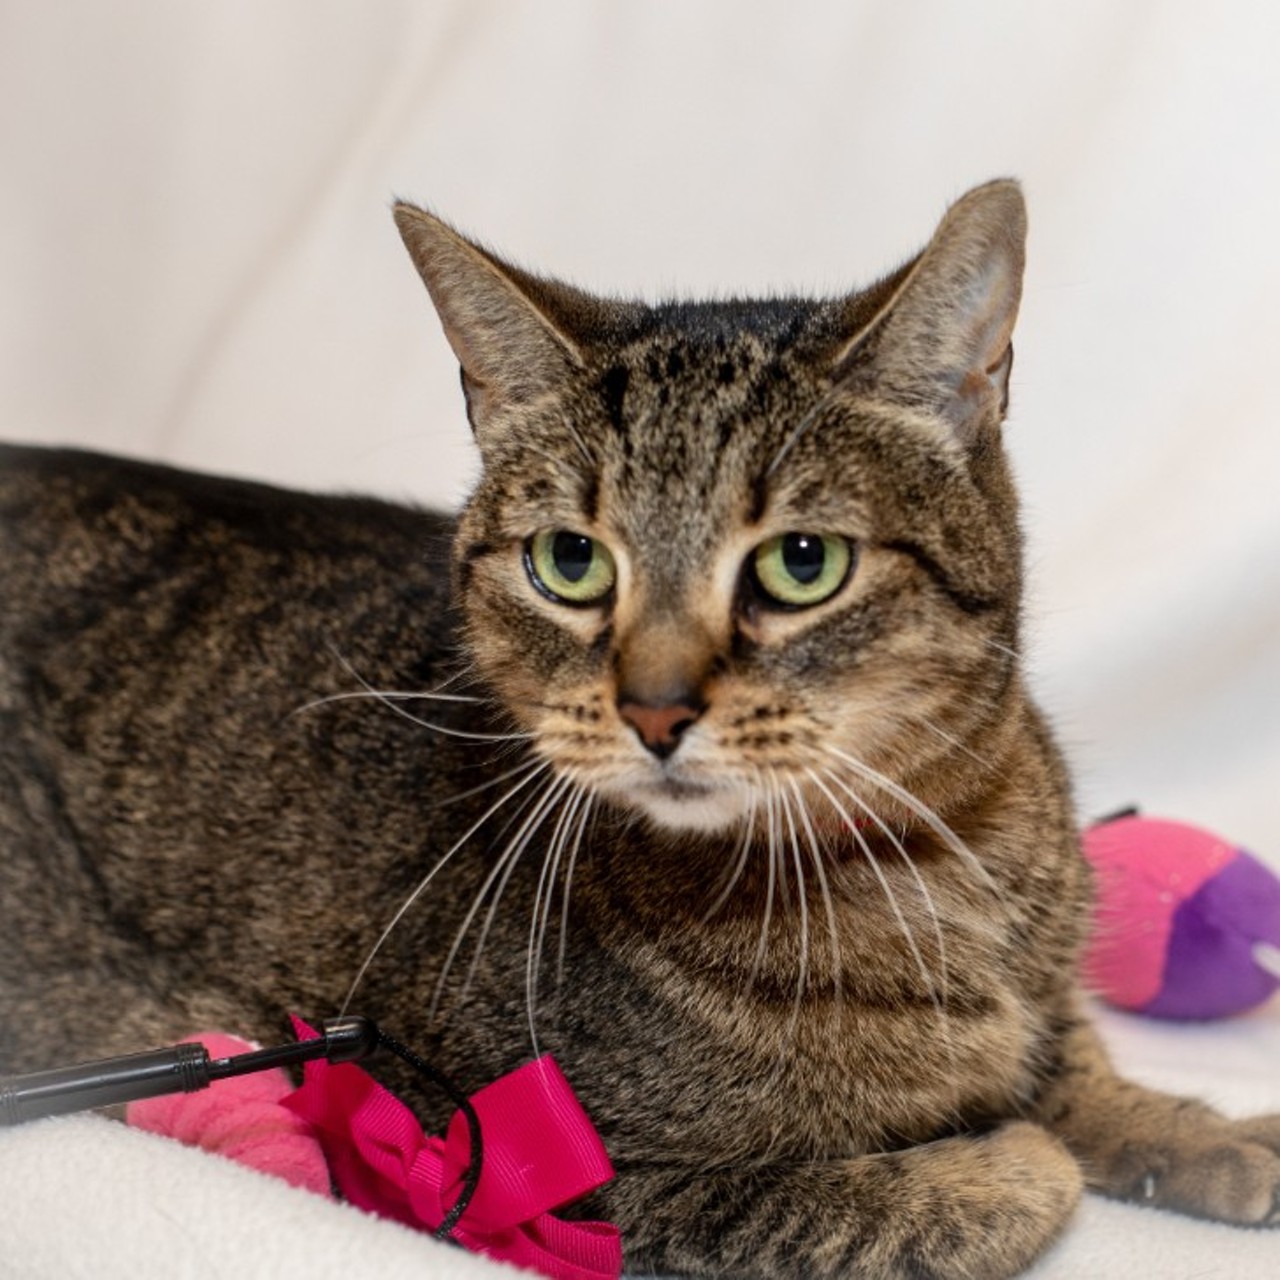 NAME: Pickles
GENDER: Female
BREED: Domestic Short Hair
AGE: 8 years, 1 month
WEIGHT: 10 pounds
SPECIAL CONSIDERATIONS: Pickles prefers a home with older or no children and no other cats.
REASON I CAME TO MHS: Owner surrender
LOCATION: PetSmart of Roseville
ID NUMBER: 871631